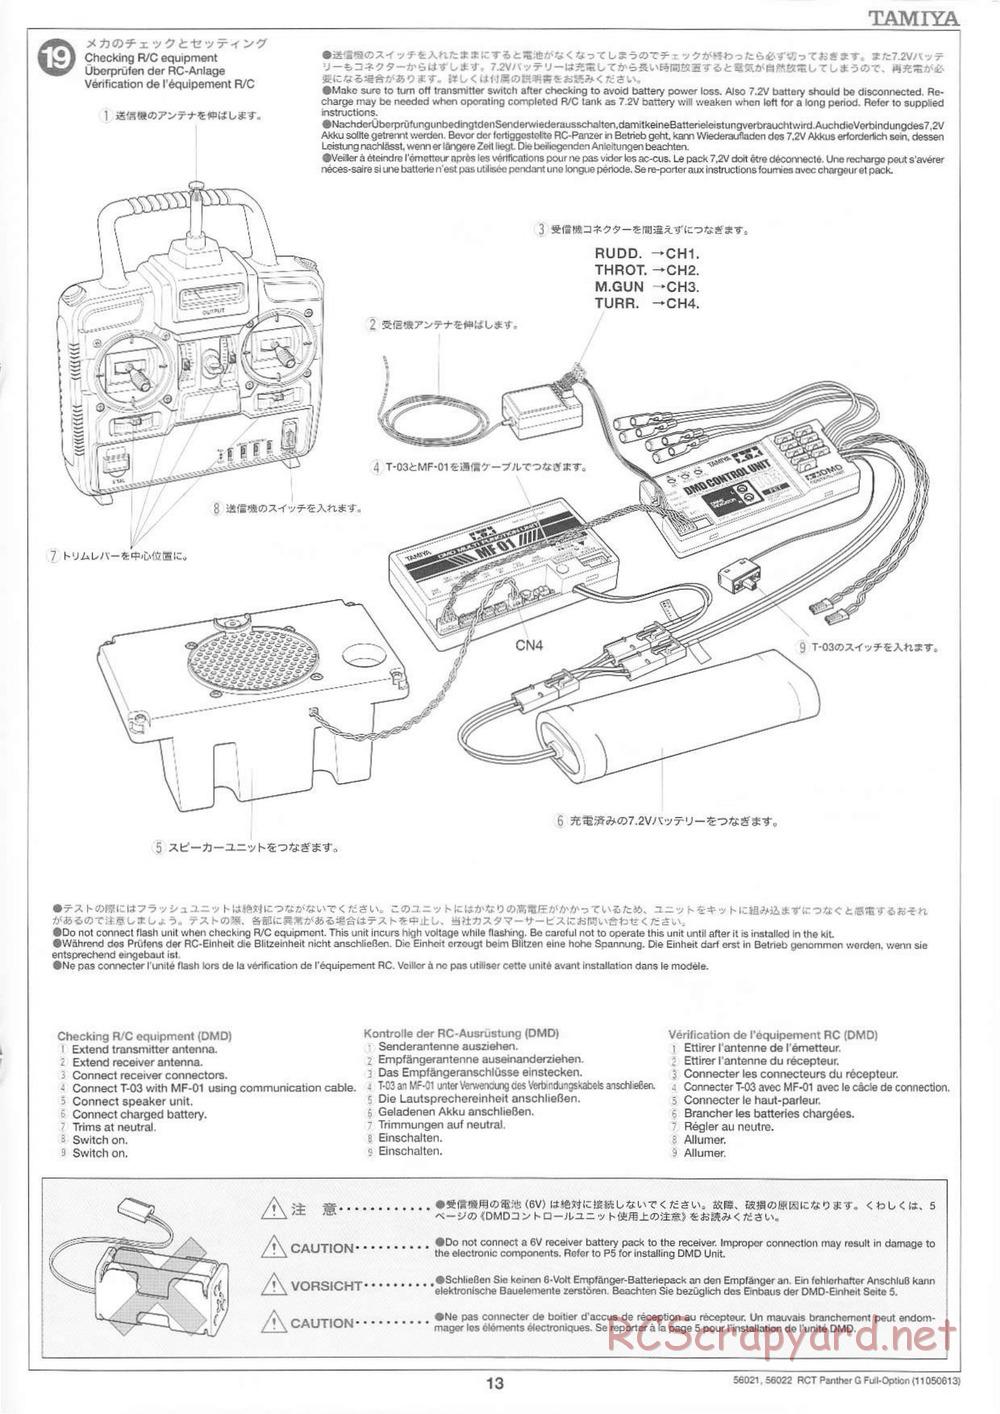 Tamiya - Panther Type G - 1/16 Scale Chassis - Manual - Page 13